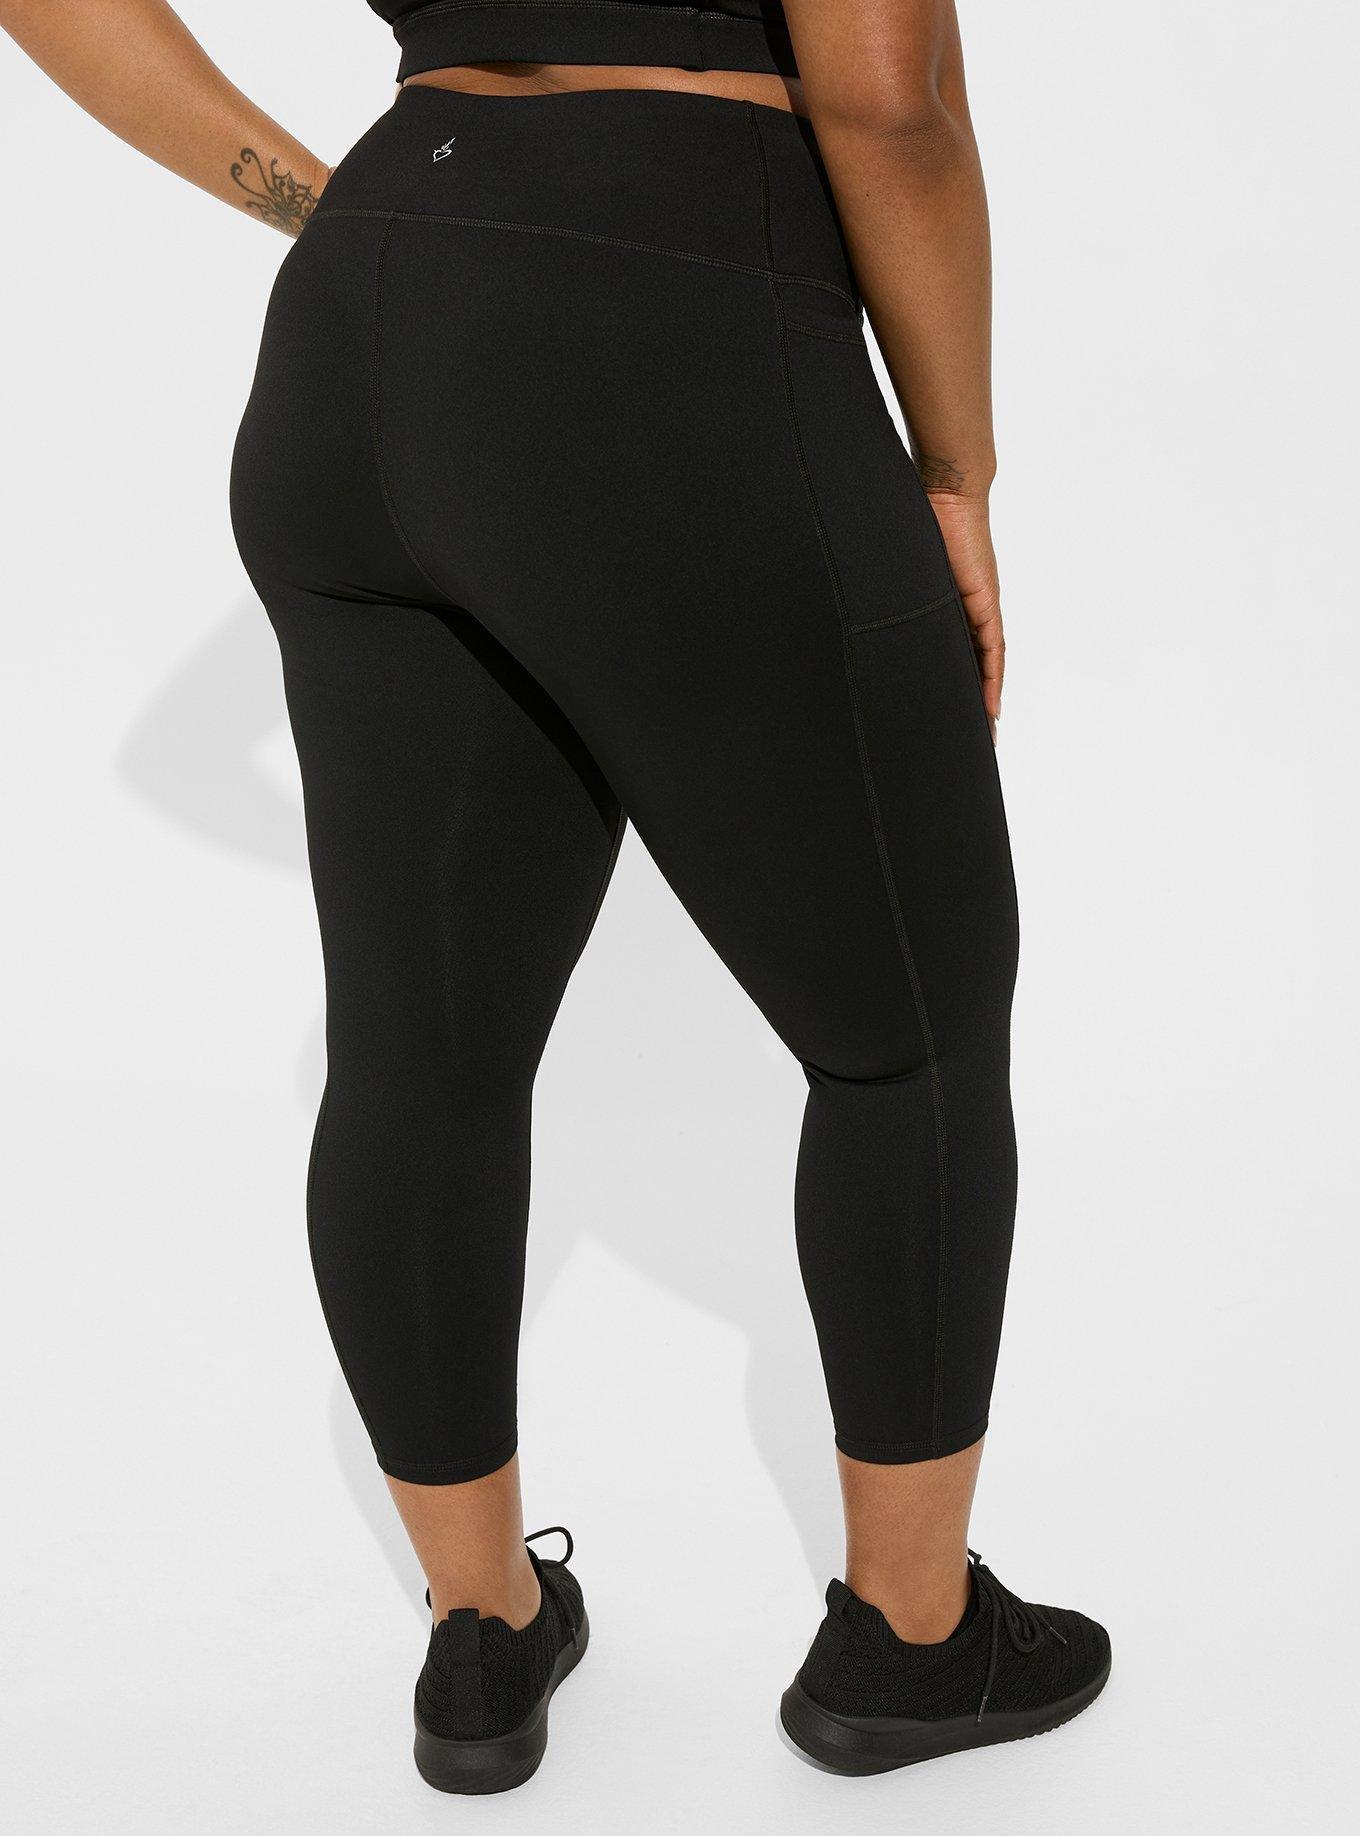 XERSION Women's Plus 0X Black Pull-on fitted crop exercise pants